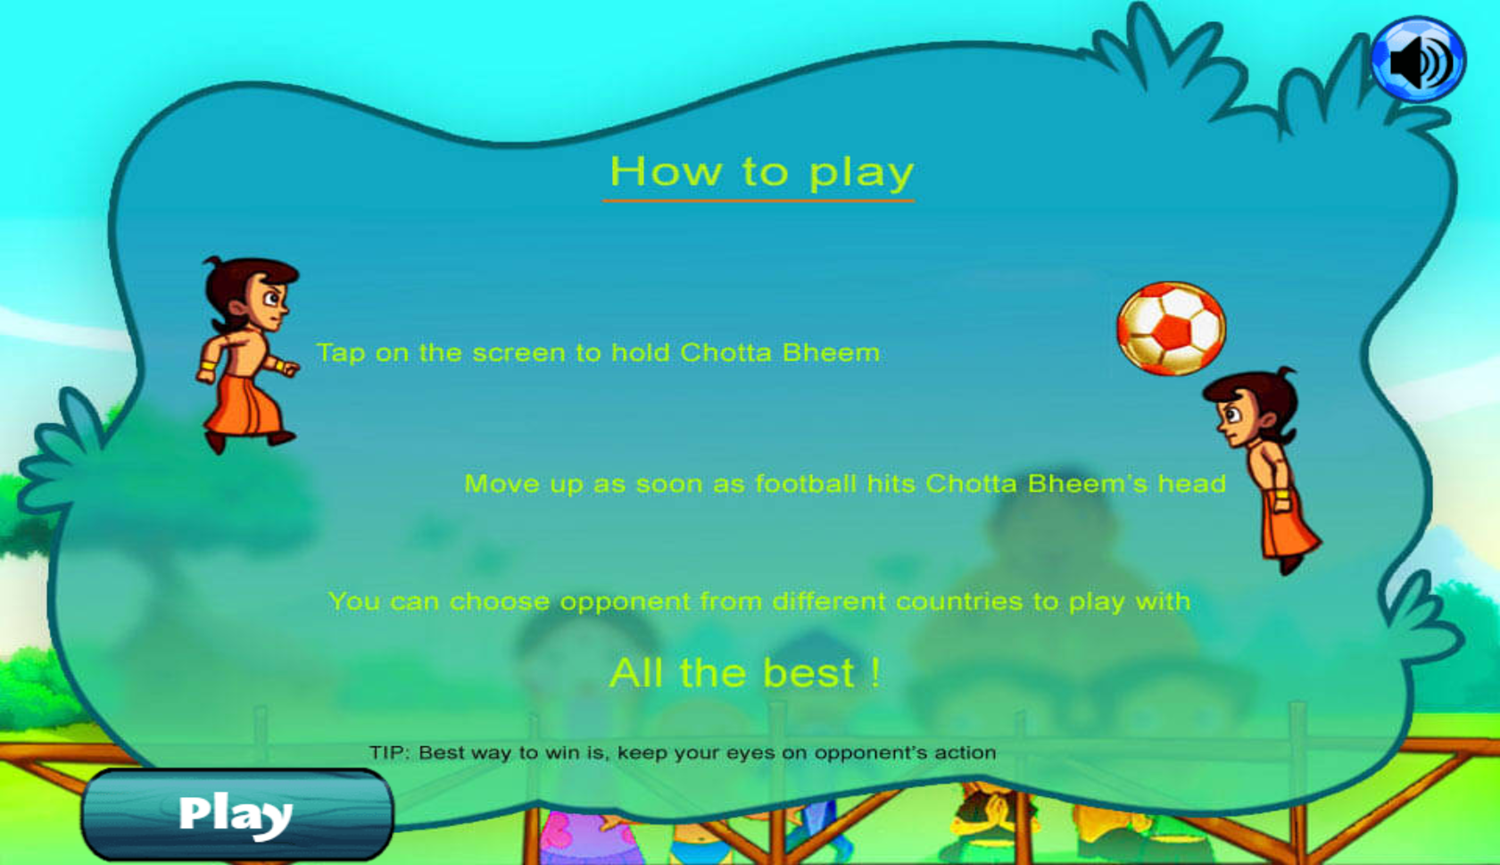 Chhota Bheem and Header Football Competition Game How To Play Screenshot.